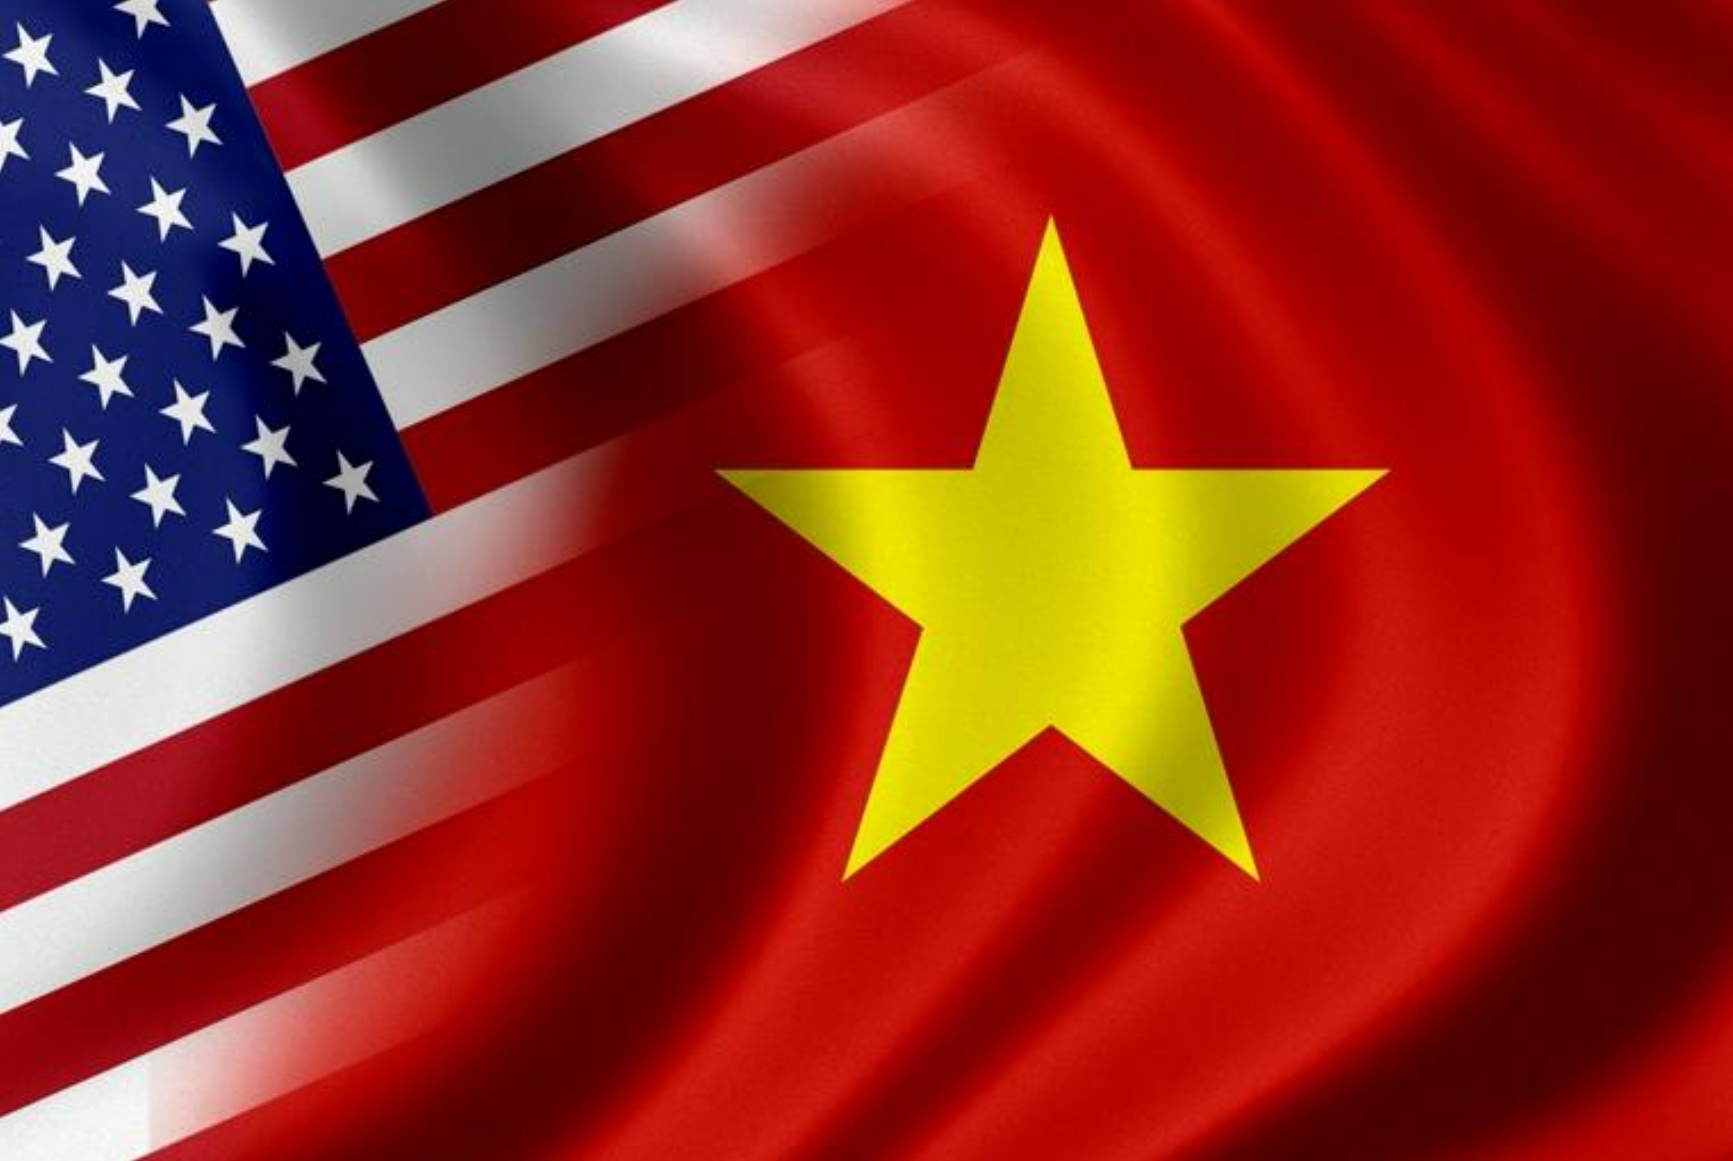 No Eternal Friends or Enemies Between Nations, but Temporary Reasonableness Where Appropriate: The Example of Advancing the U.S.-Vietnam Strategic Relationship